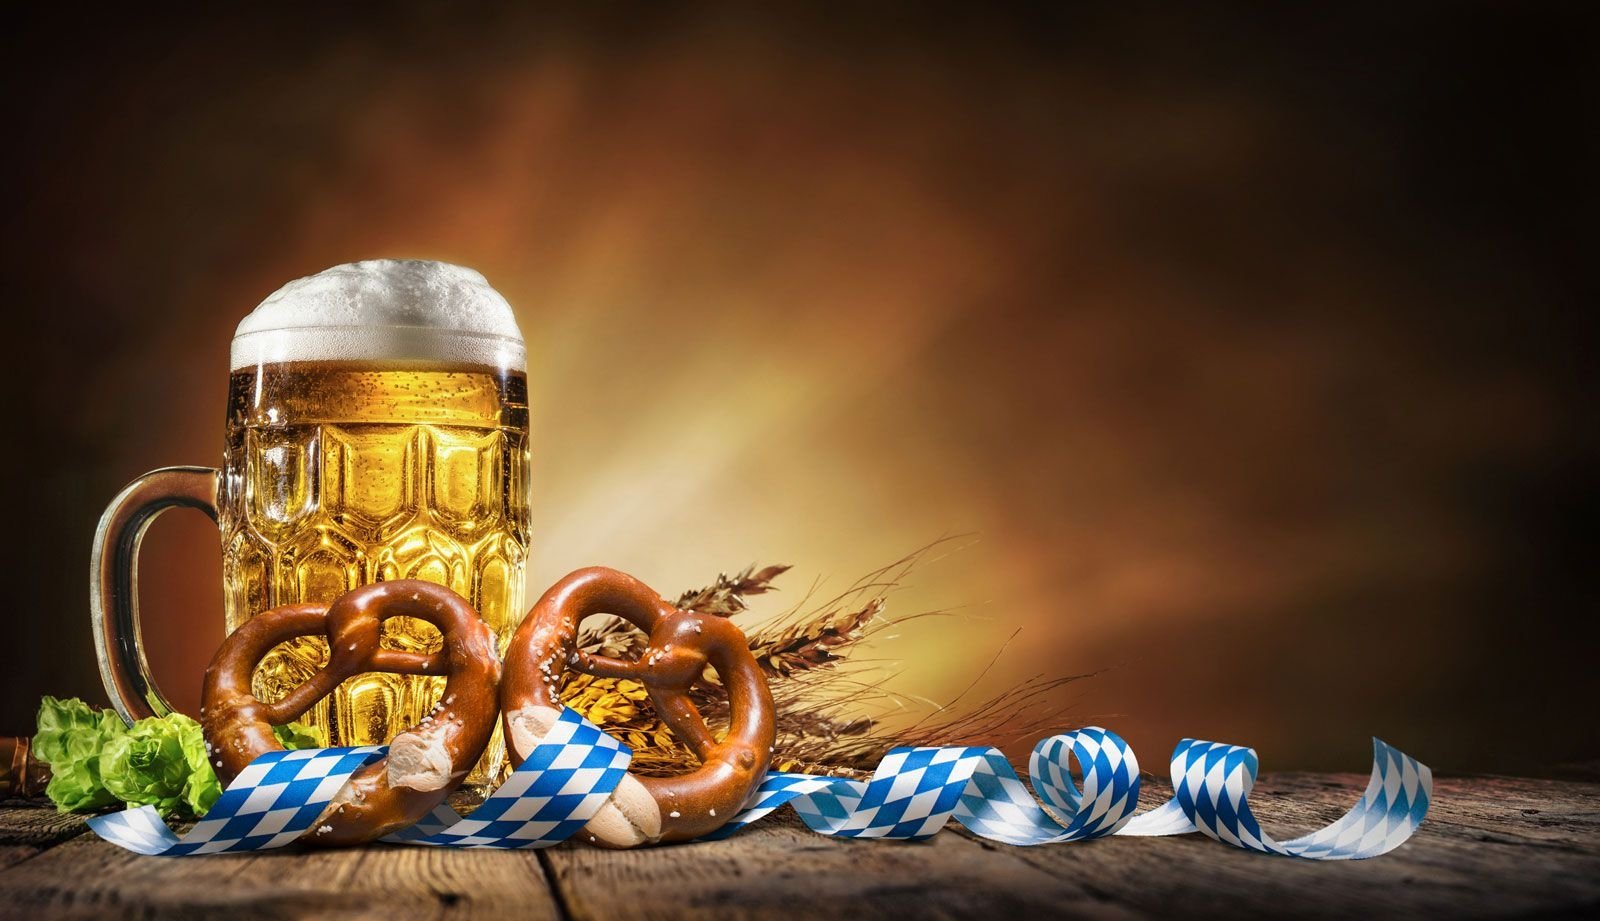 Brown backdrop with skein of beer and pretzel in the foreground